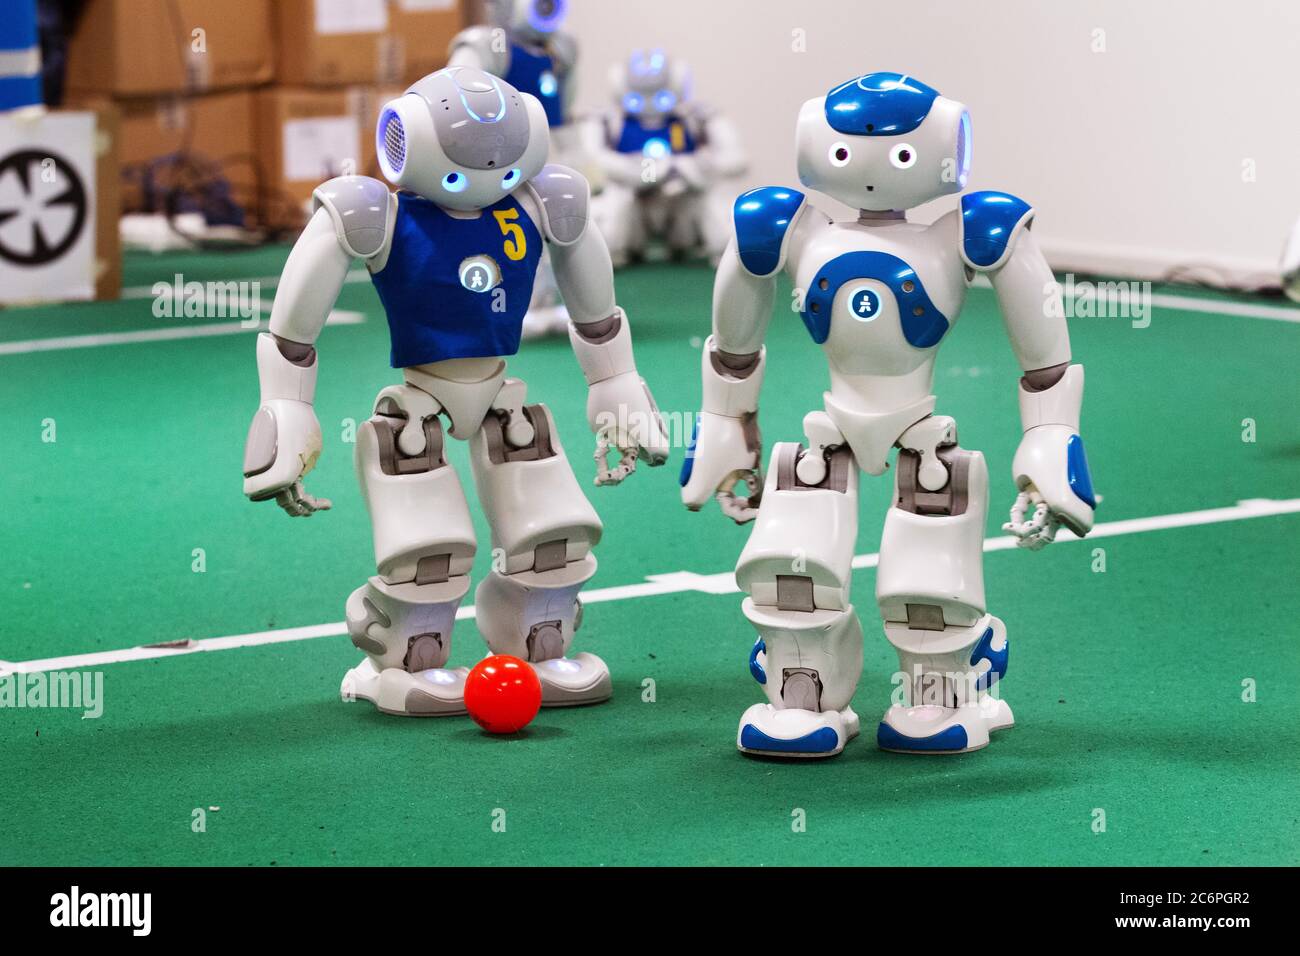 Linköping, Sweden 20160107 Swedish national team in robot football has qualified for the World Cup Germany! At Linköping University, researchers and students are currently the national team, which consists